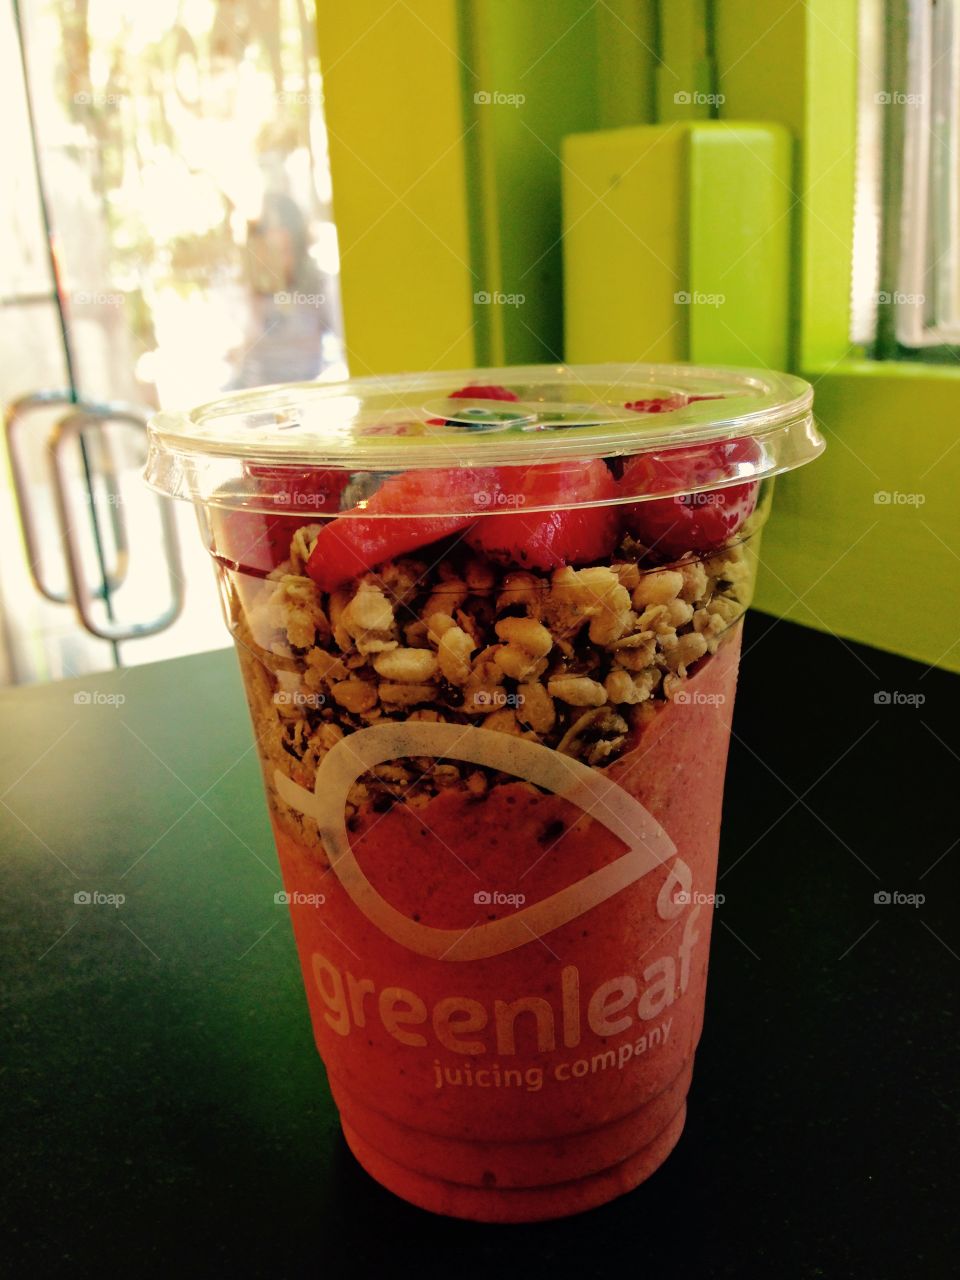 Lunch. Granola smoothie cup from green leaf juice 